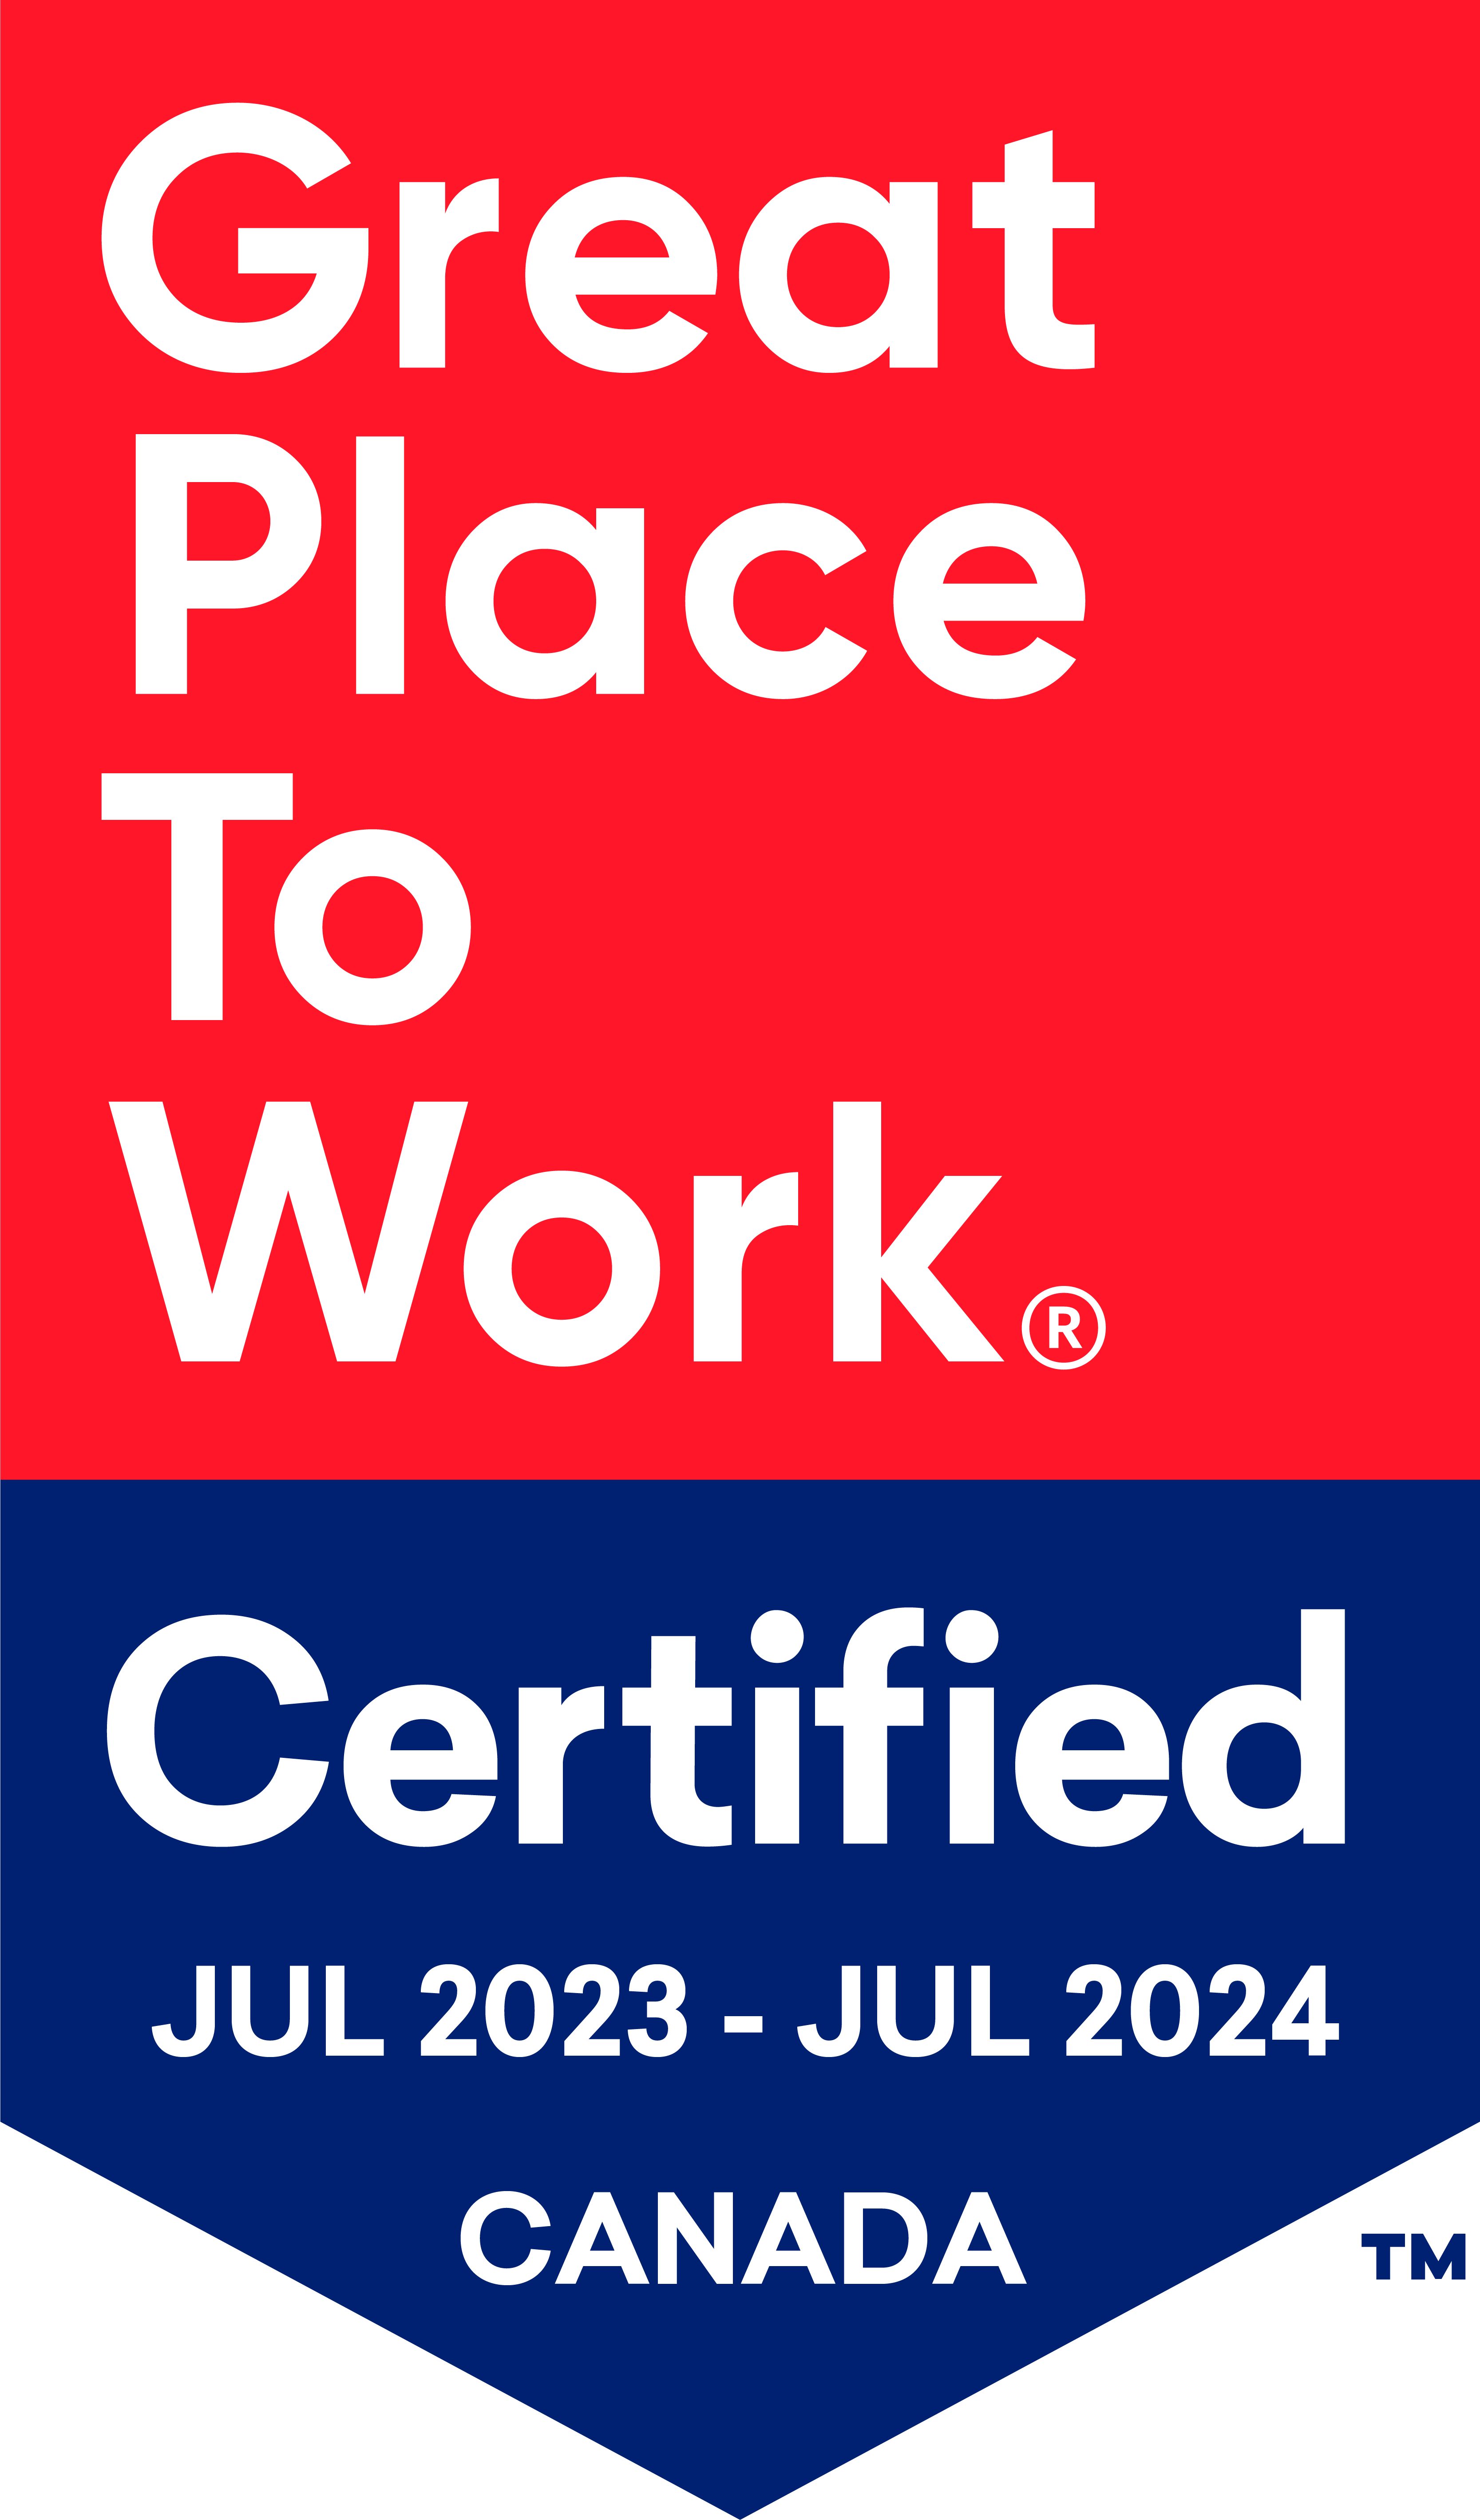 Great Place TO Work® Certified JUL 2023 - JUL 2024 CANADA